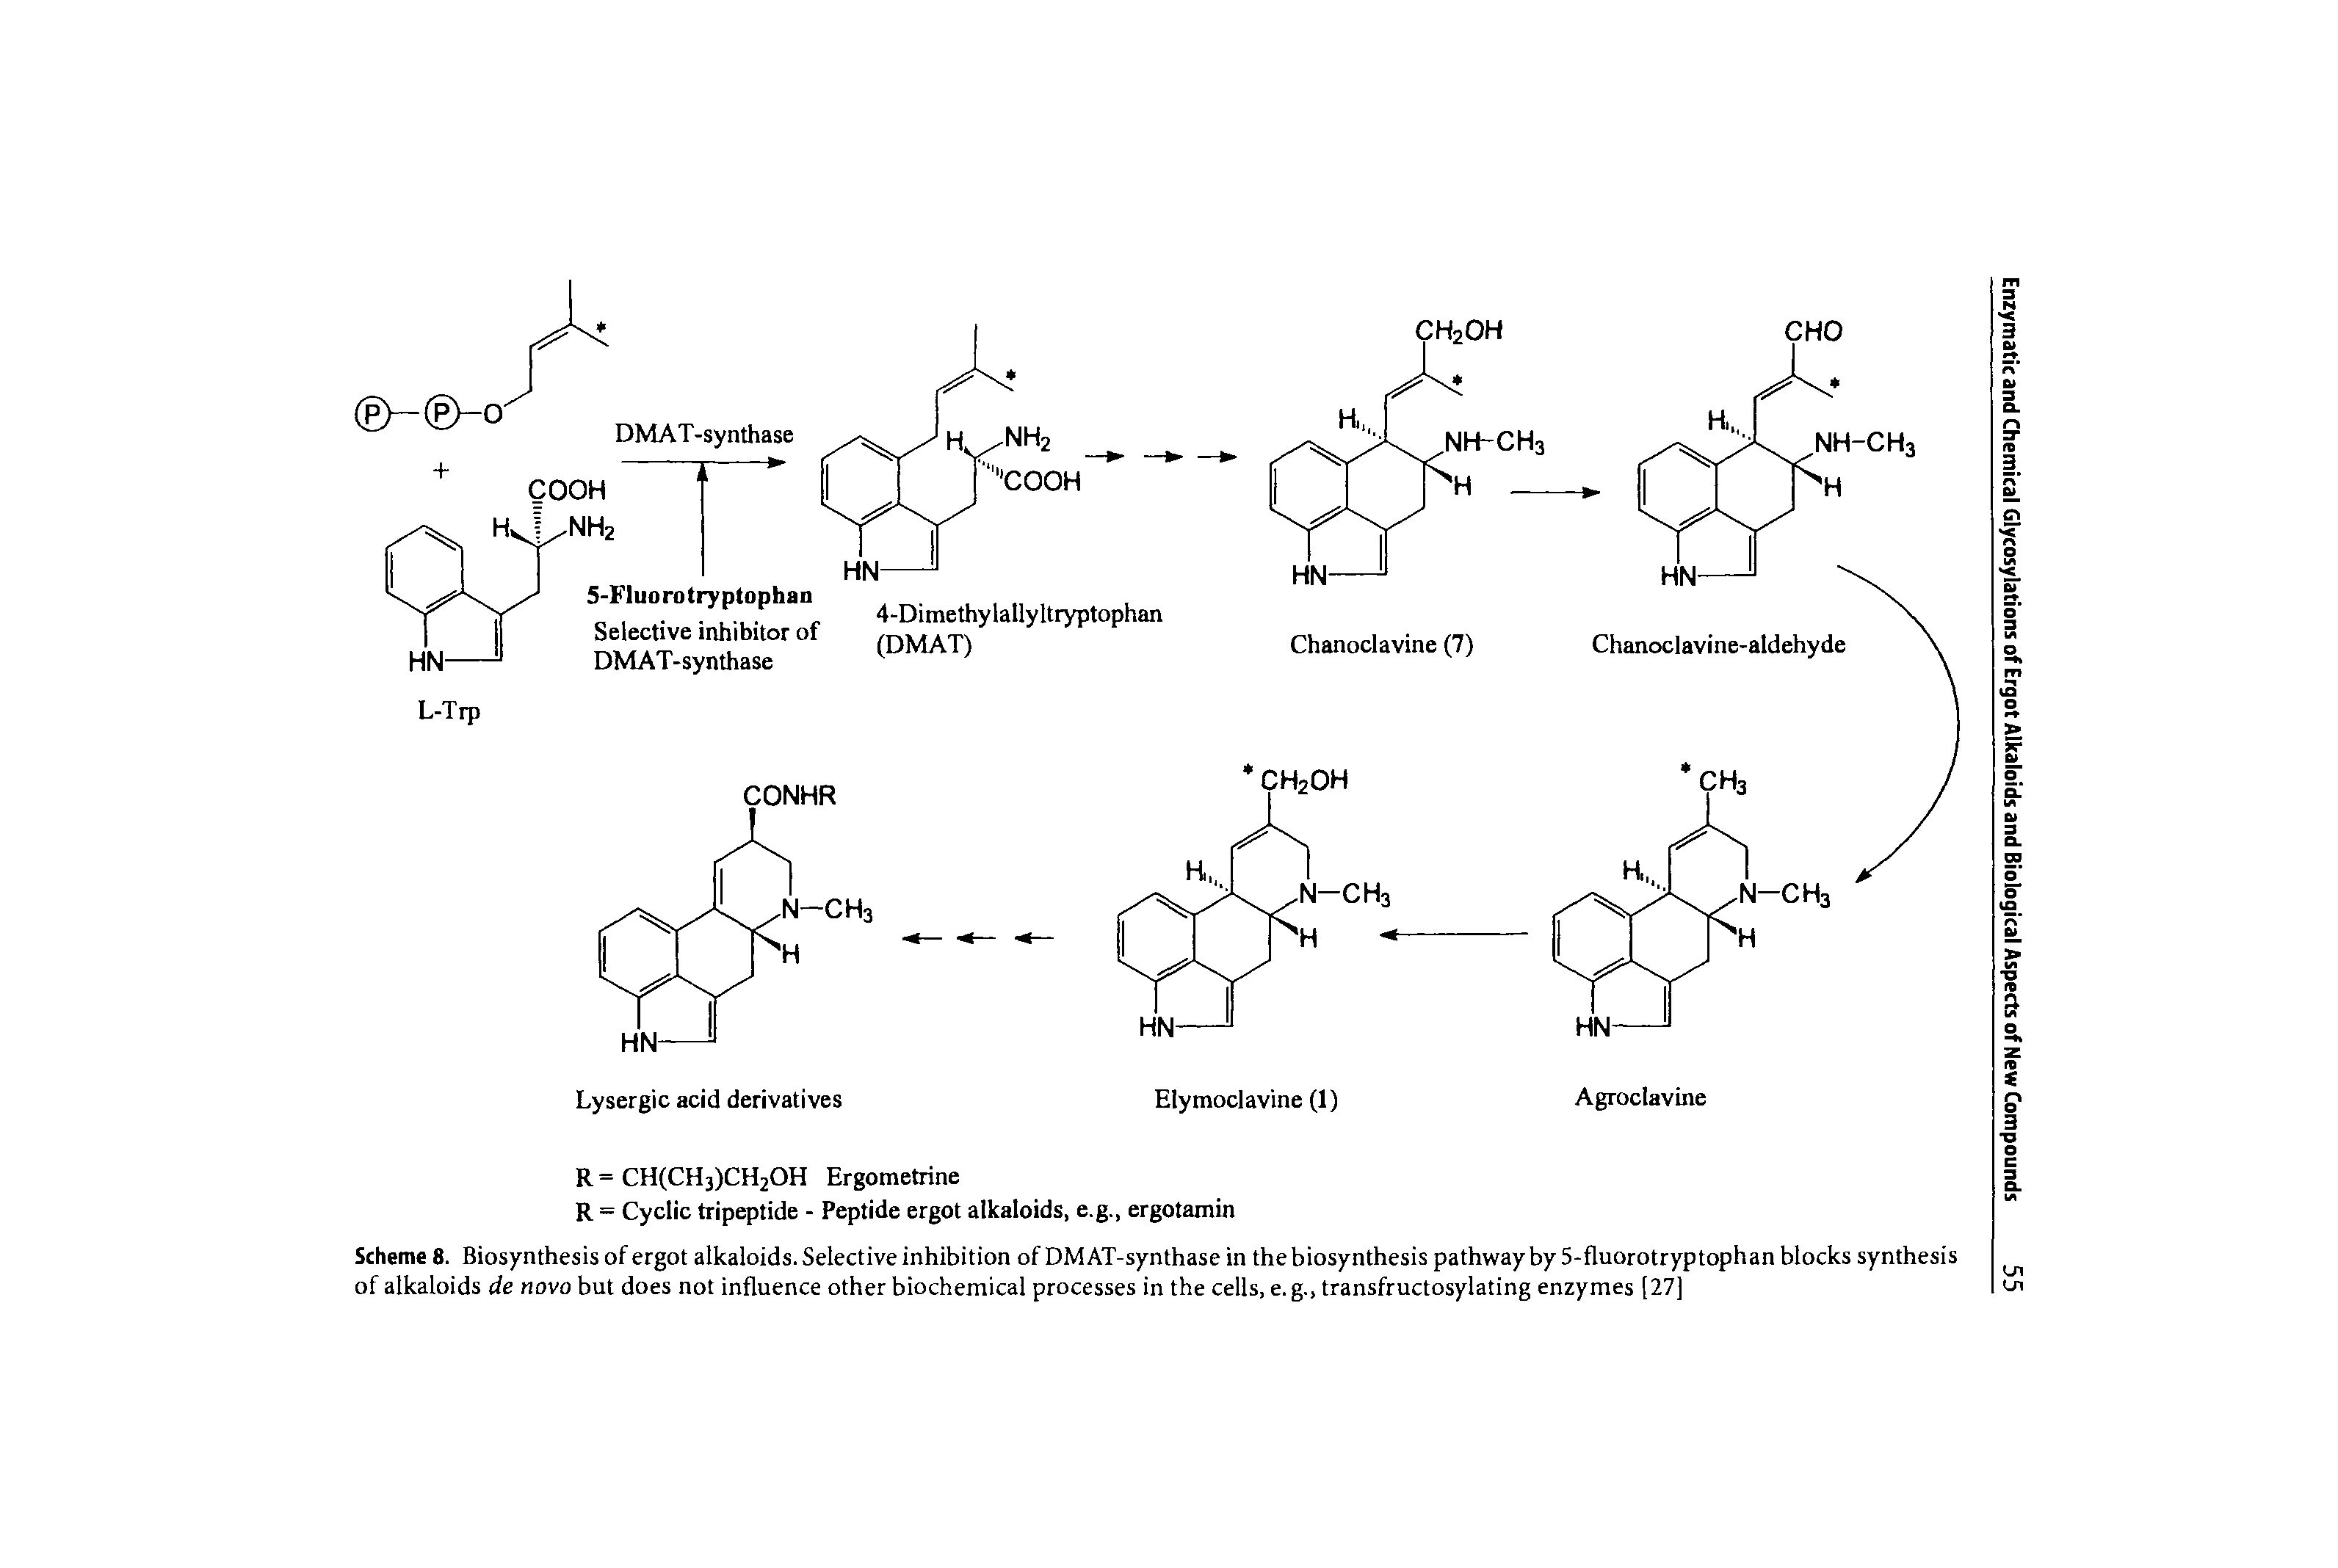 Scheme 8. Biosynthesis of ergot alkaloids. Selective inhibition of DMAT-synthase in the biosynthesis pathwayby 5-fluorotryptophan blocks synthesis of alkaloids de novo but does not influence other biochemical processes in the cells, e. g., transfructosylating enzymes [27]...